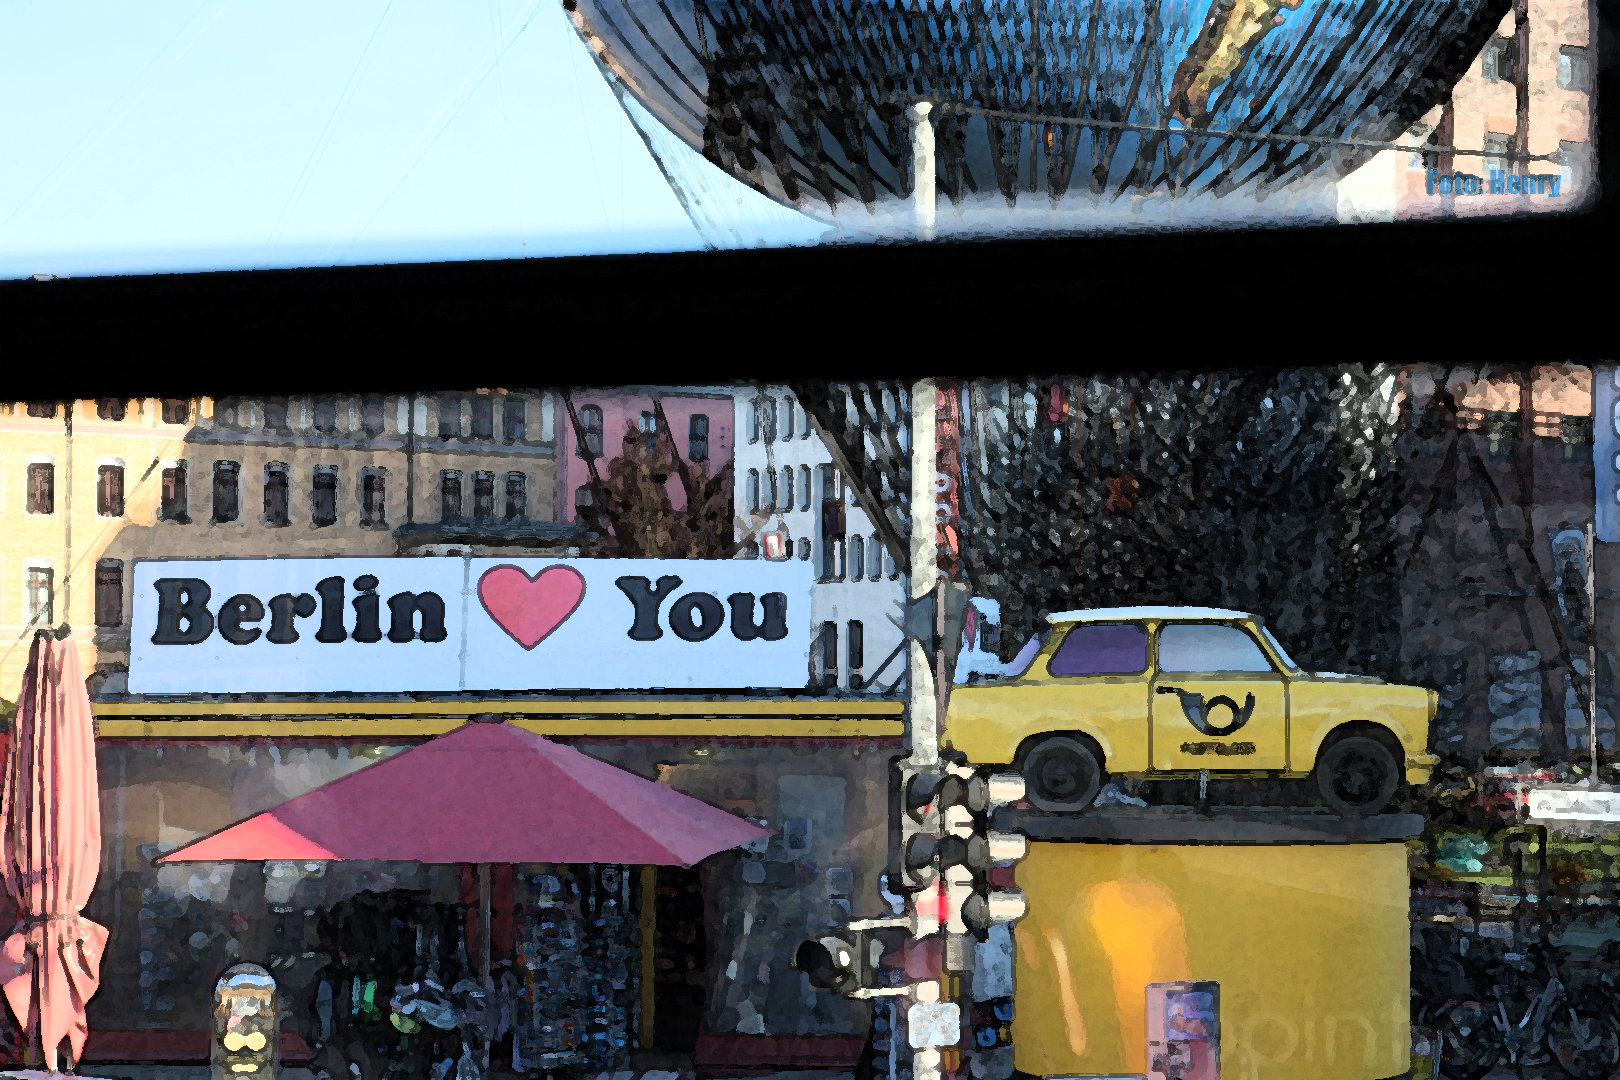 Berlin for you